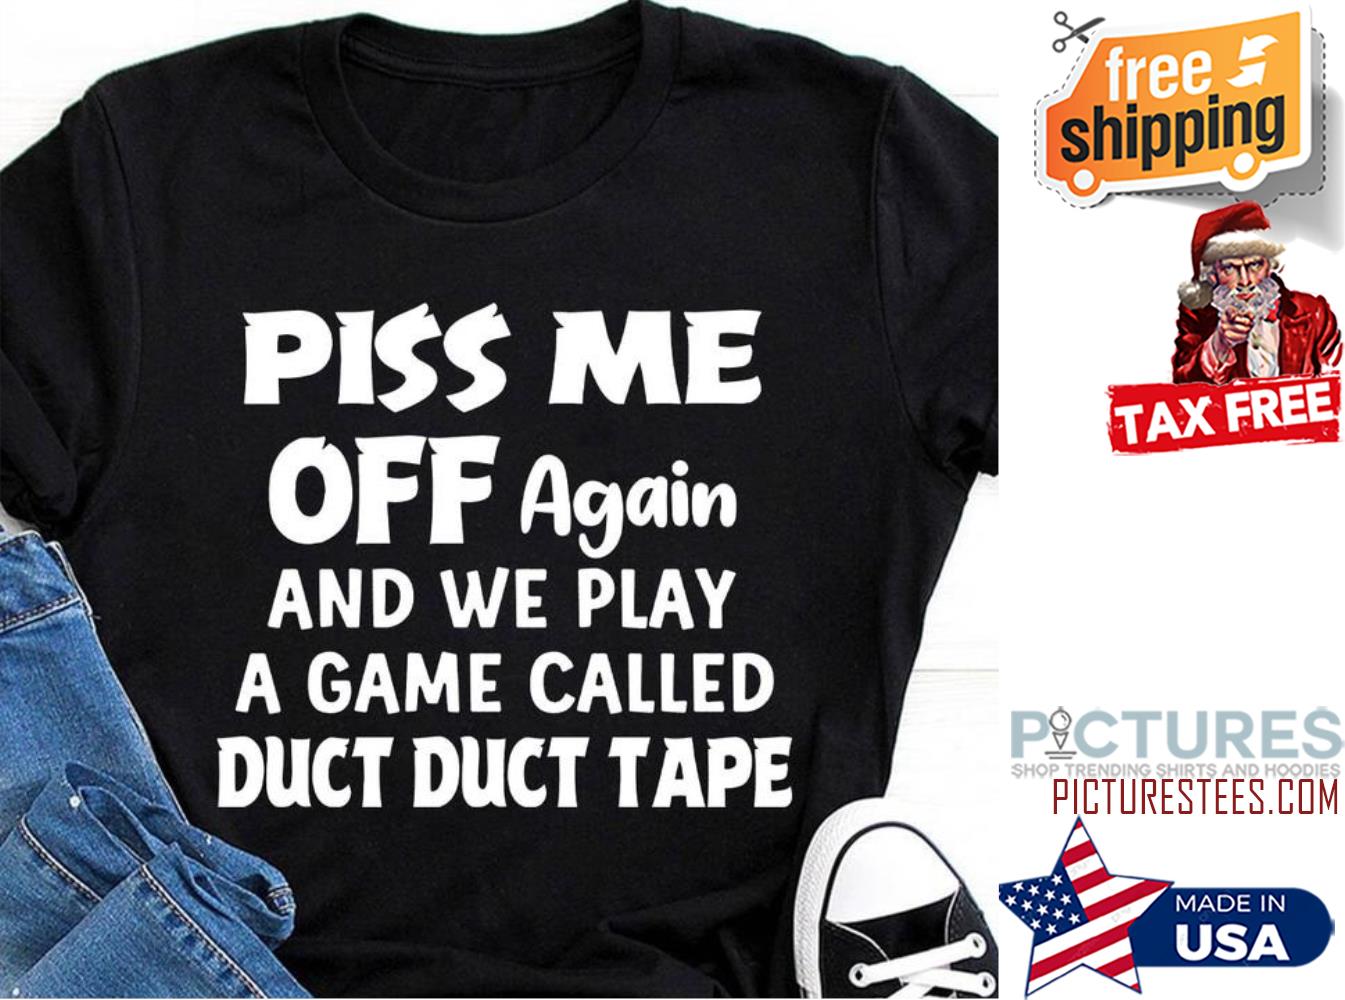 FREE shipping Piss me off again and we play a game called duct duct tape shirt, Unisex tee, hoodie, sweater, v-neck and top